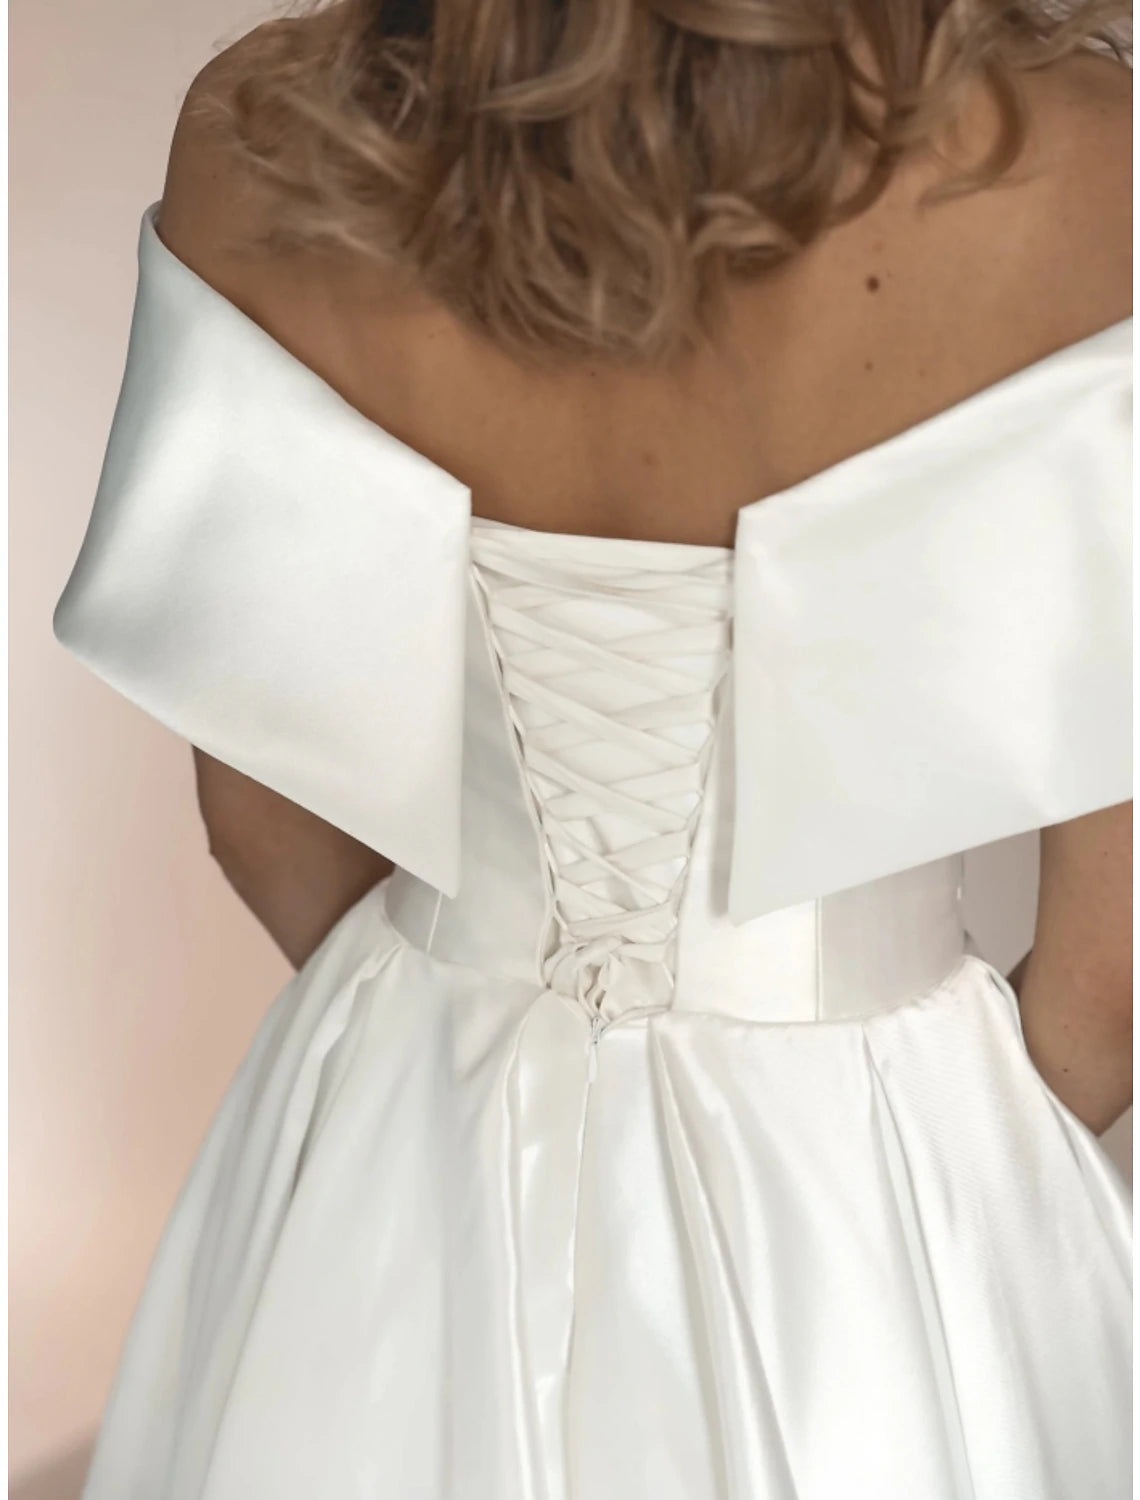 Casual Wedding Dresses A-Line Off Shoulder Short Sleeve Ankle Length Satin Bridal Gowns With Pleats Solid Color